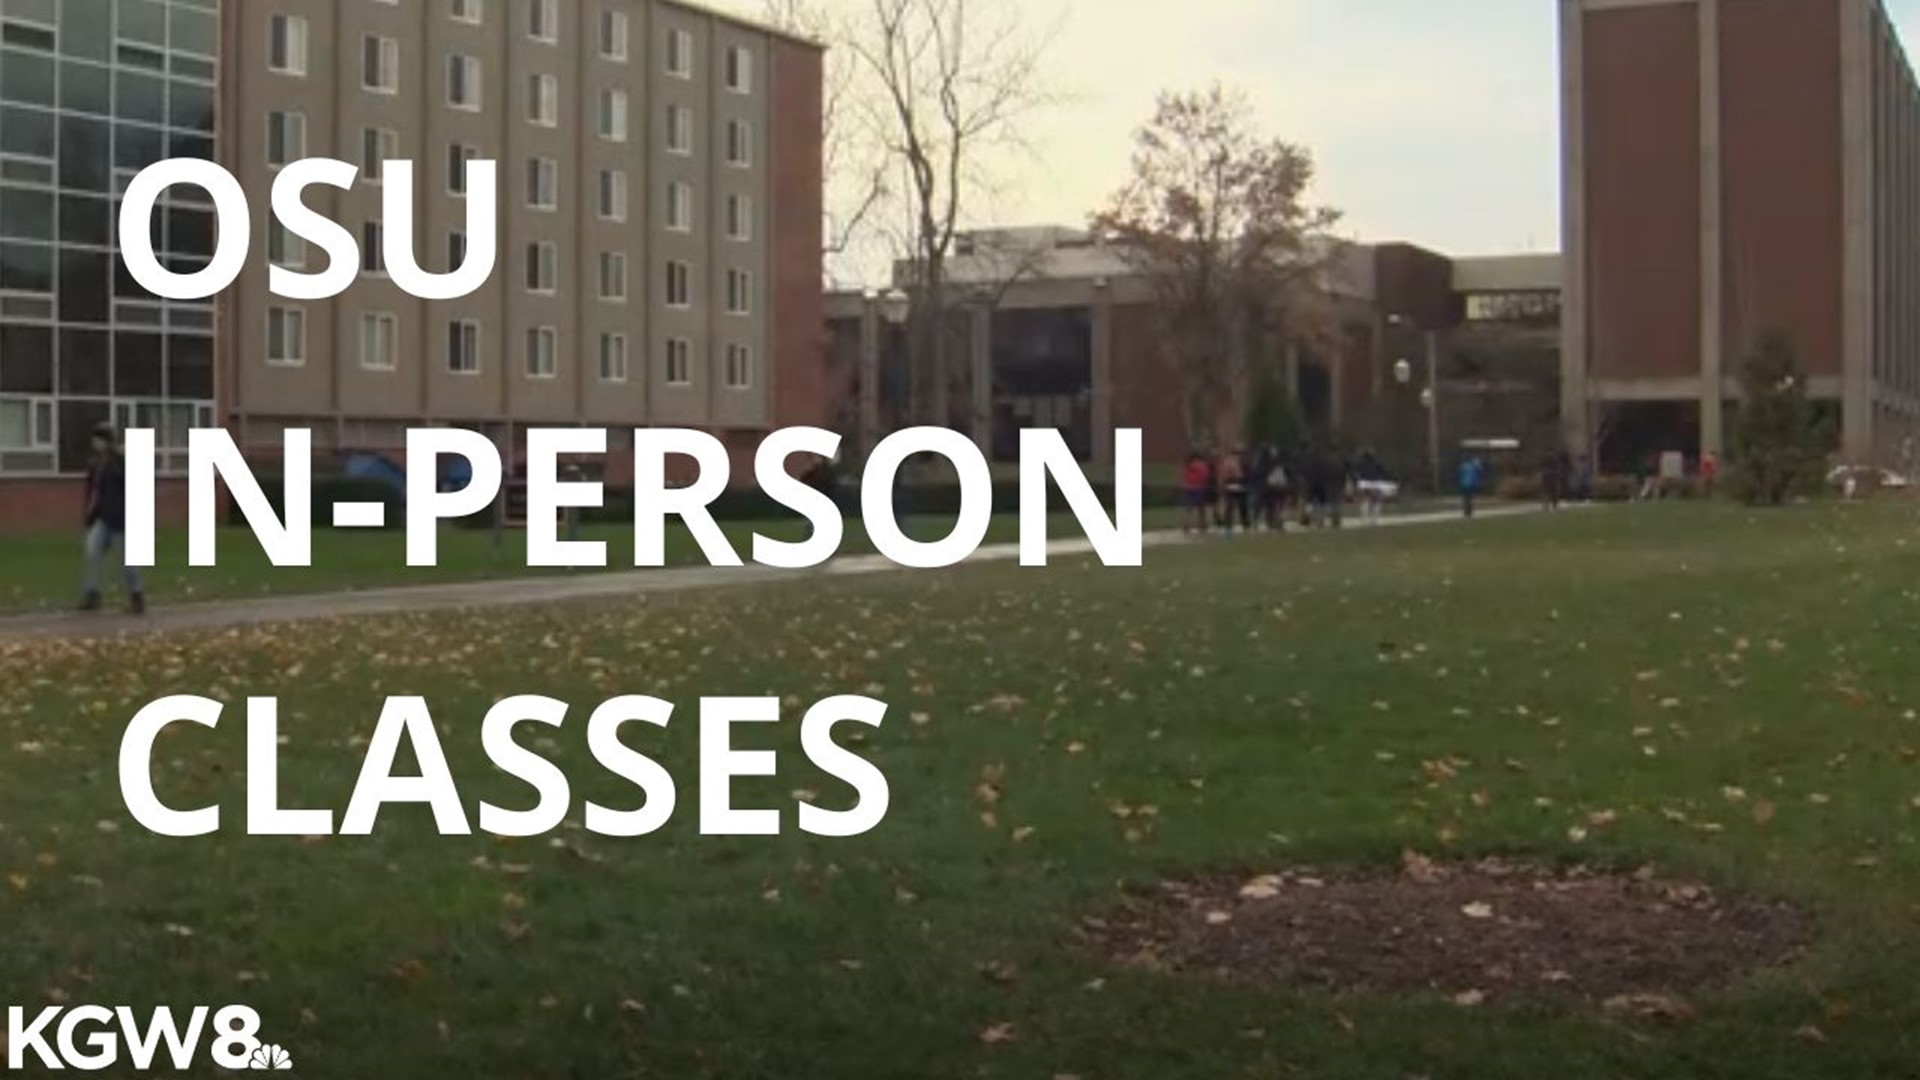 Oregon State University is preparing for in-person classes this fall.